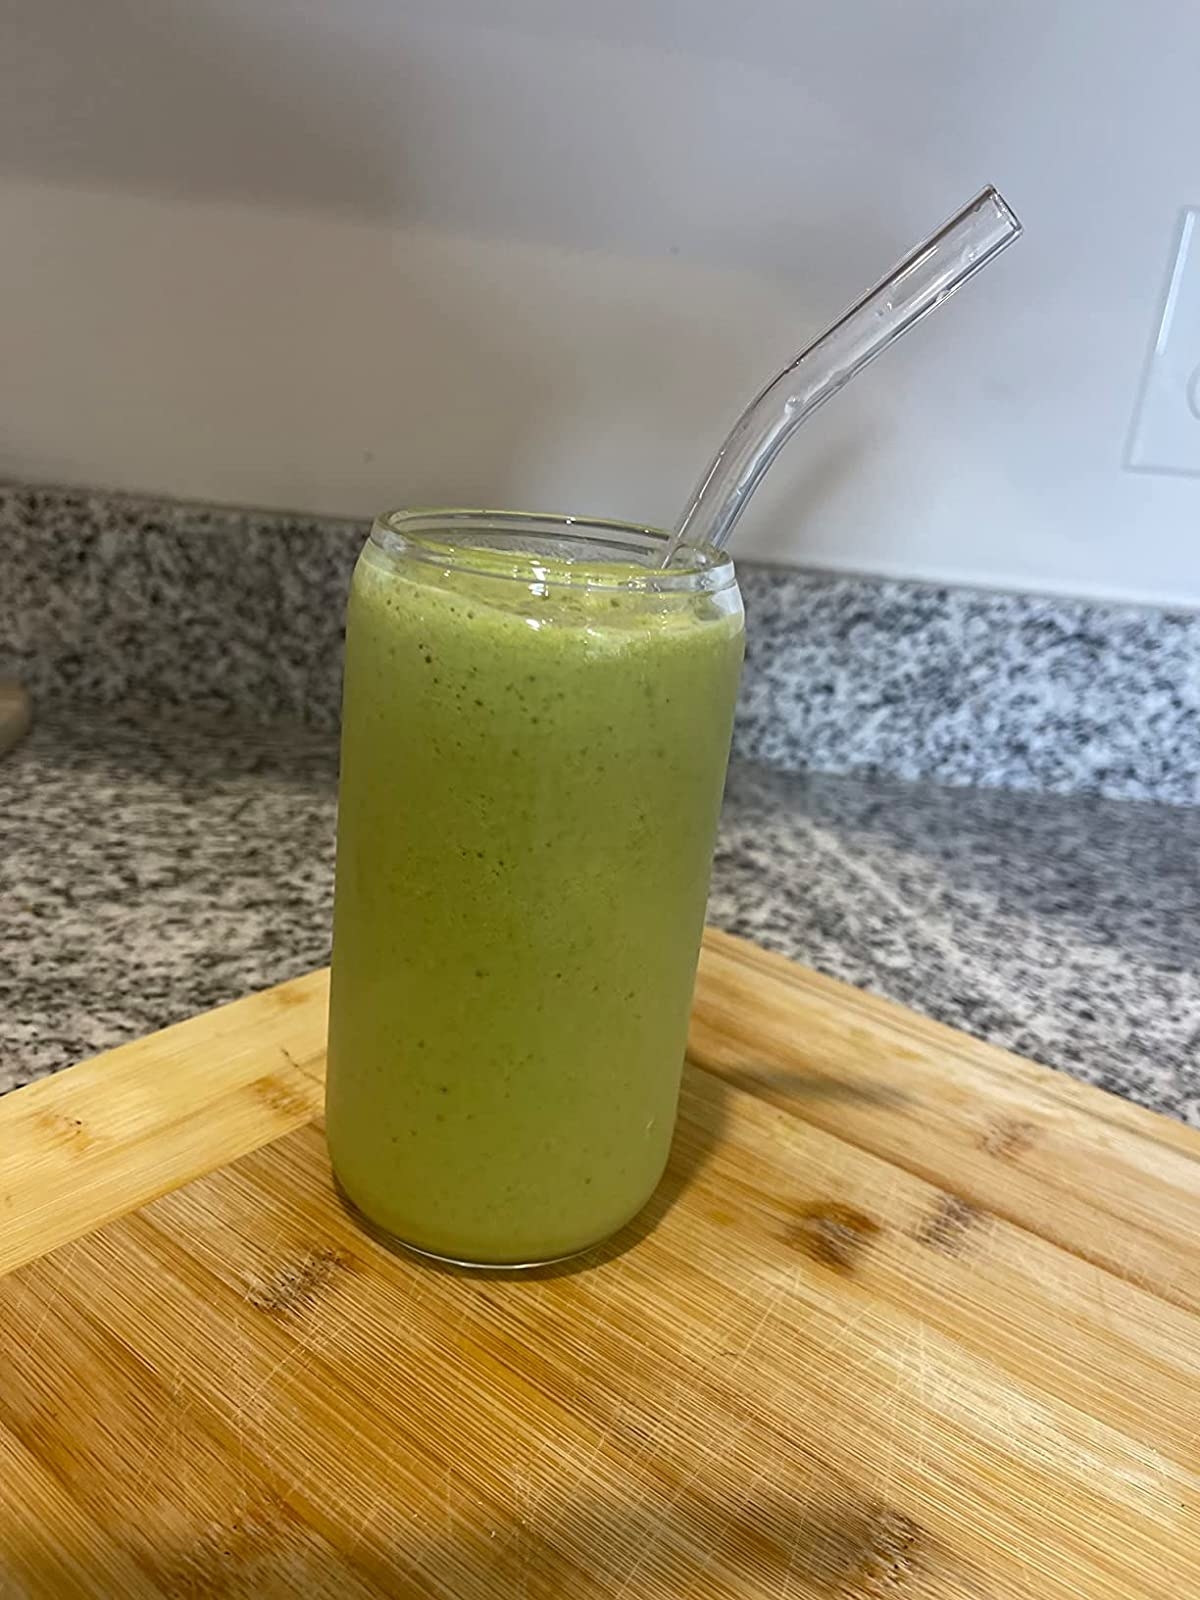 Reviewer image of green juice in the glass